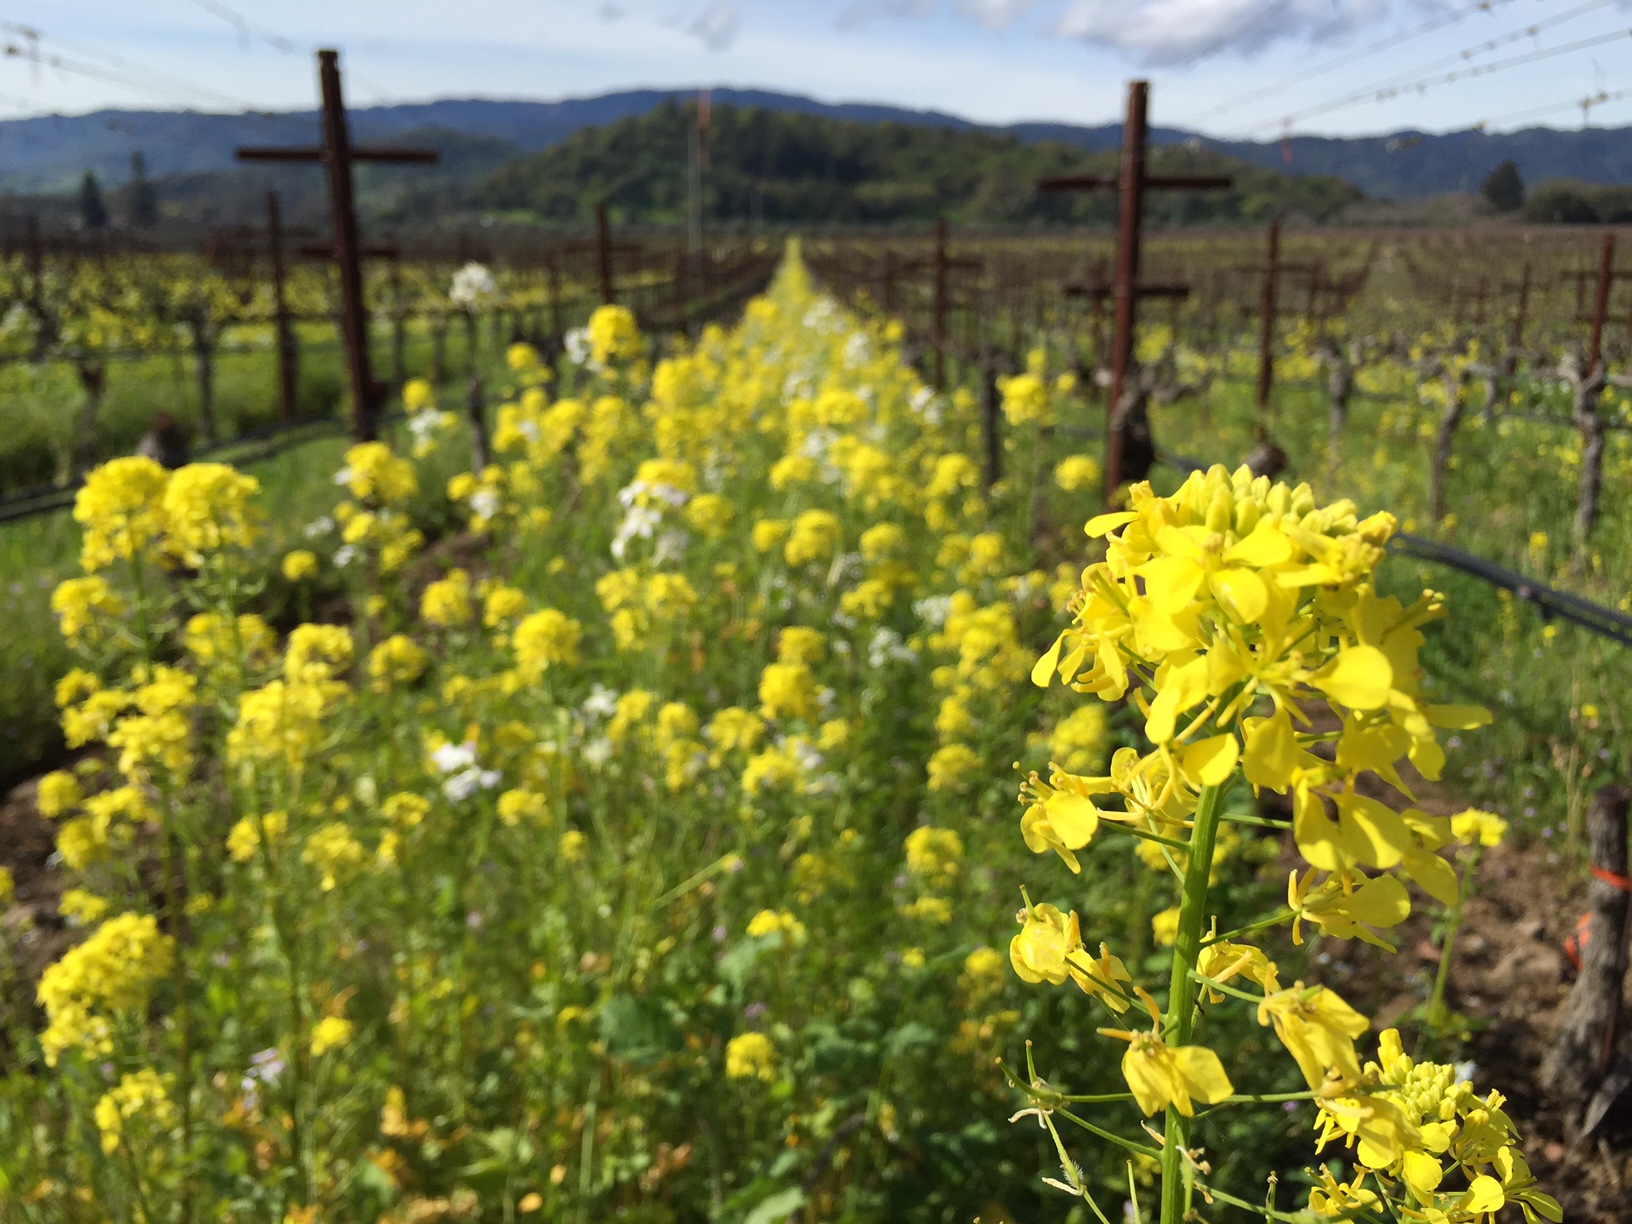 We are proud to implement a specialized cover crop and tillage program that maximizes vineyard and soil health.